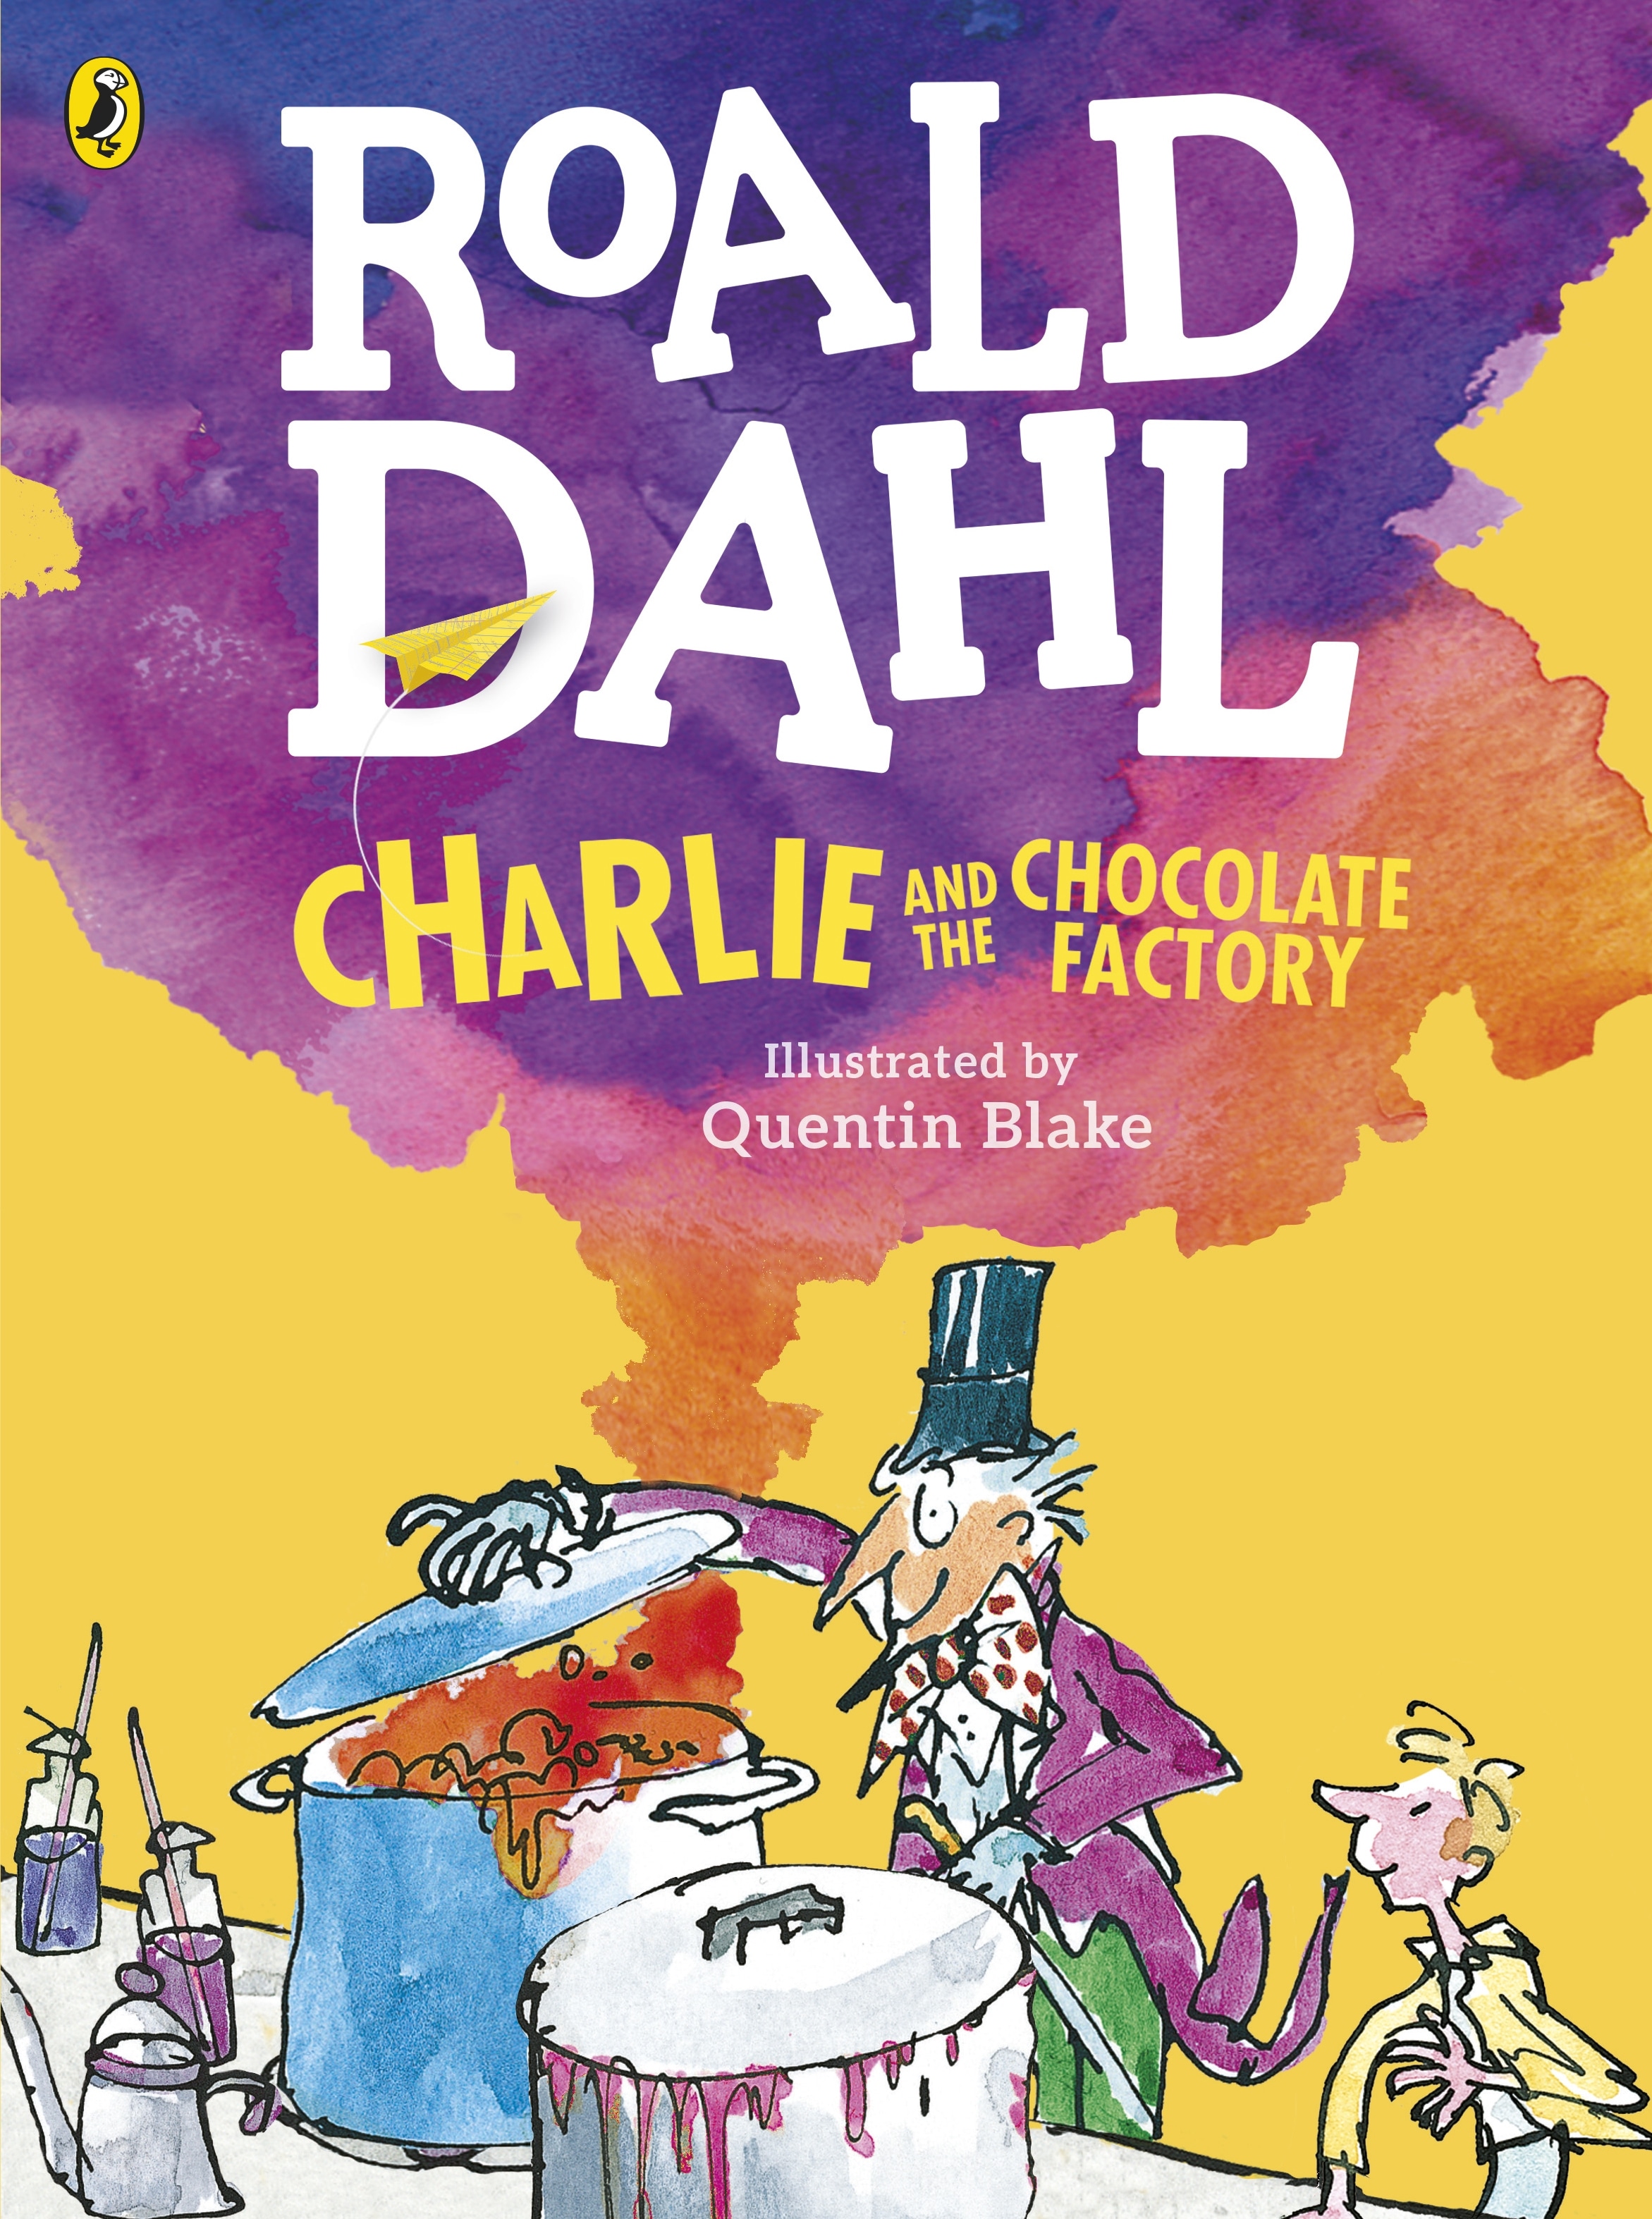 Book “Charlie and the Chocolate Factory (Colour Edition)” by Roald Dahl — October 6, 2016